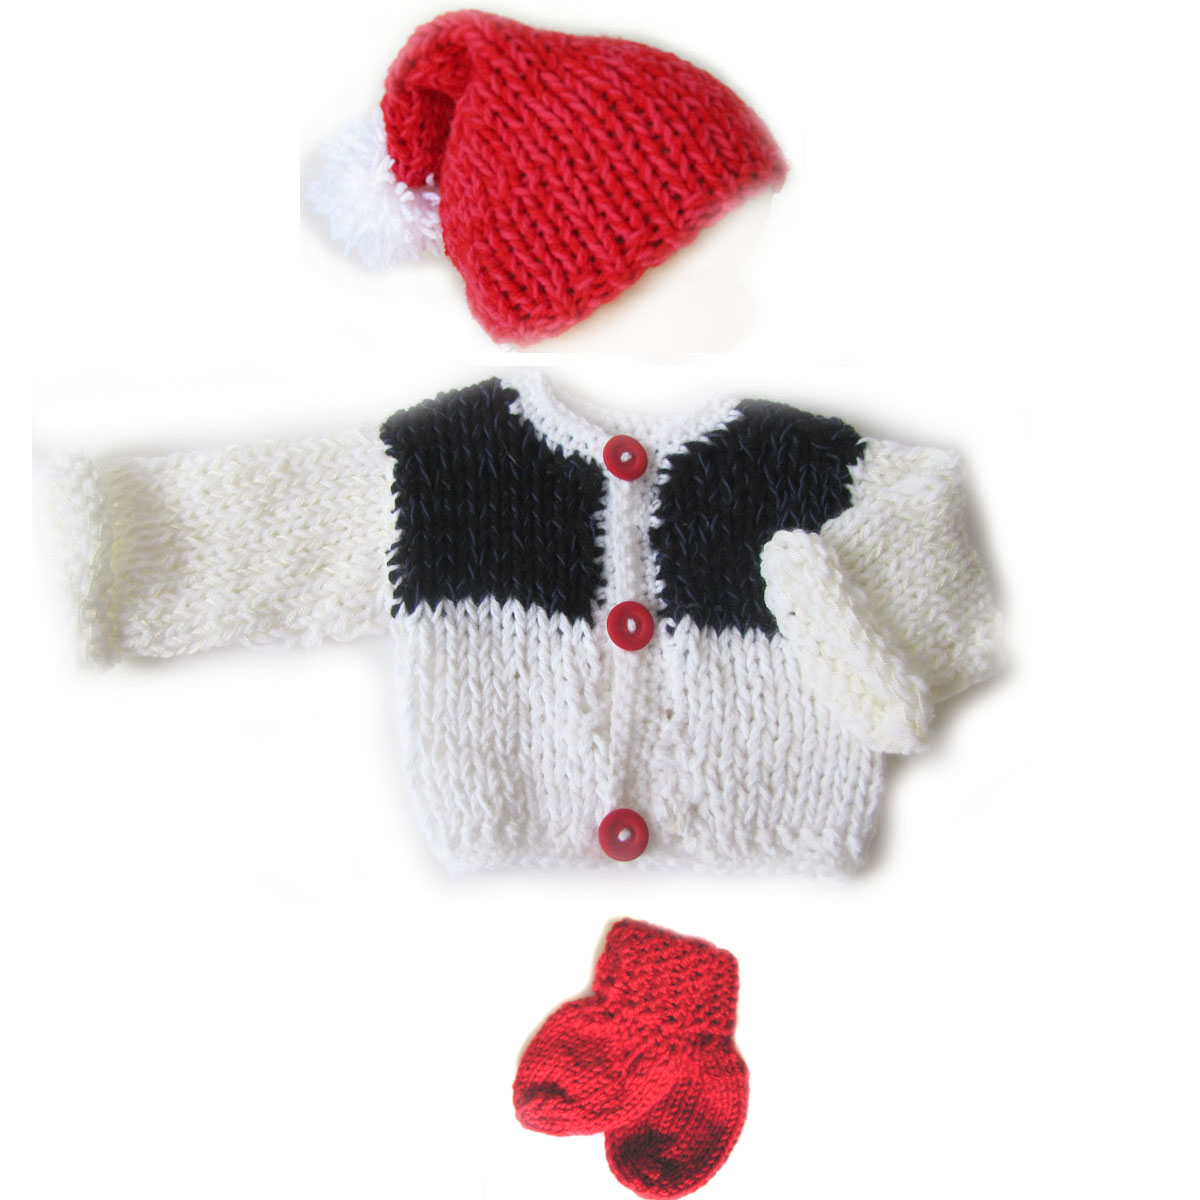 KSS Black and White Sweater/Cardigan, Hat & Booties (0-3 Months) SW-124 KSS-SW-124-AZH